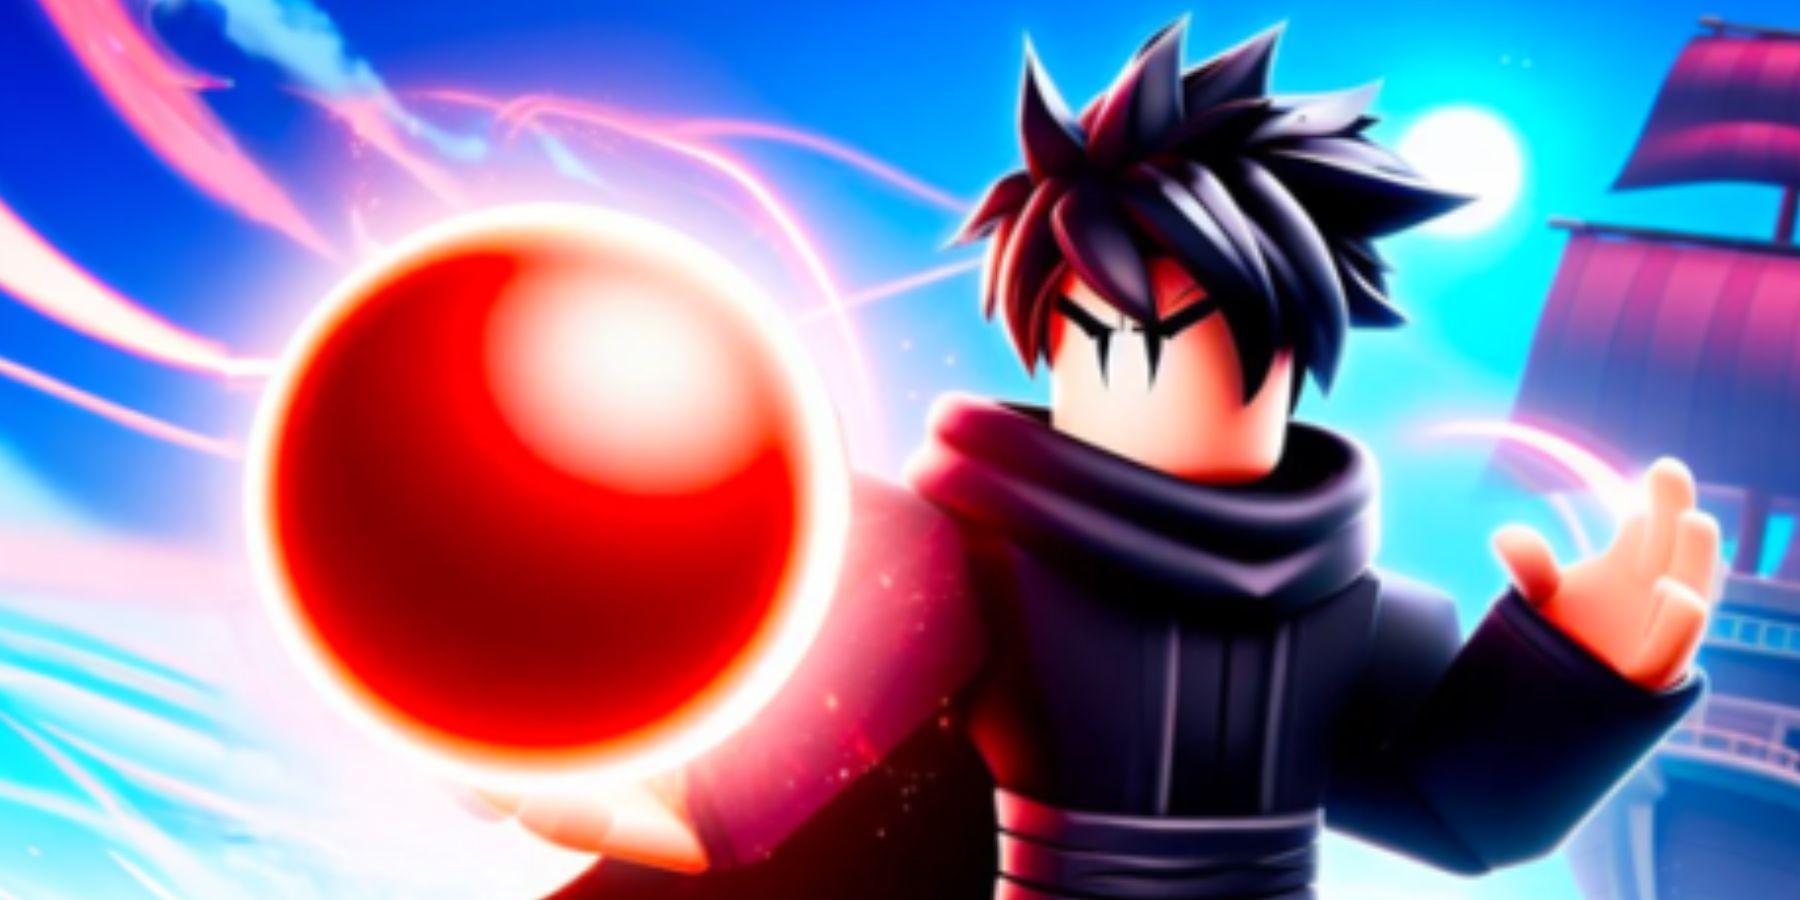 NEW* ALL WORKING UPDATE 4 CODES FOR ANIME PUNCH SIMULATOR! ROBLOX ANIME  PUNCH SIMULATOR CODES! - YouTube